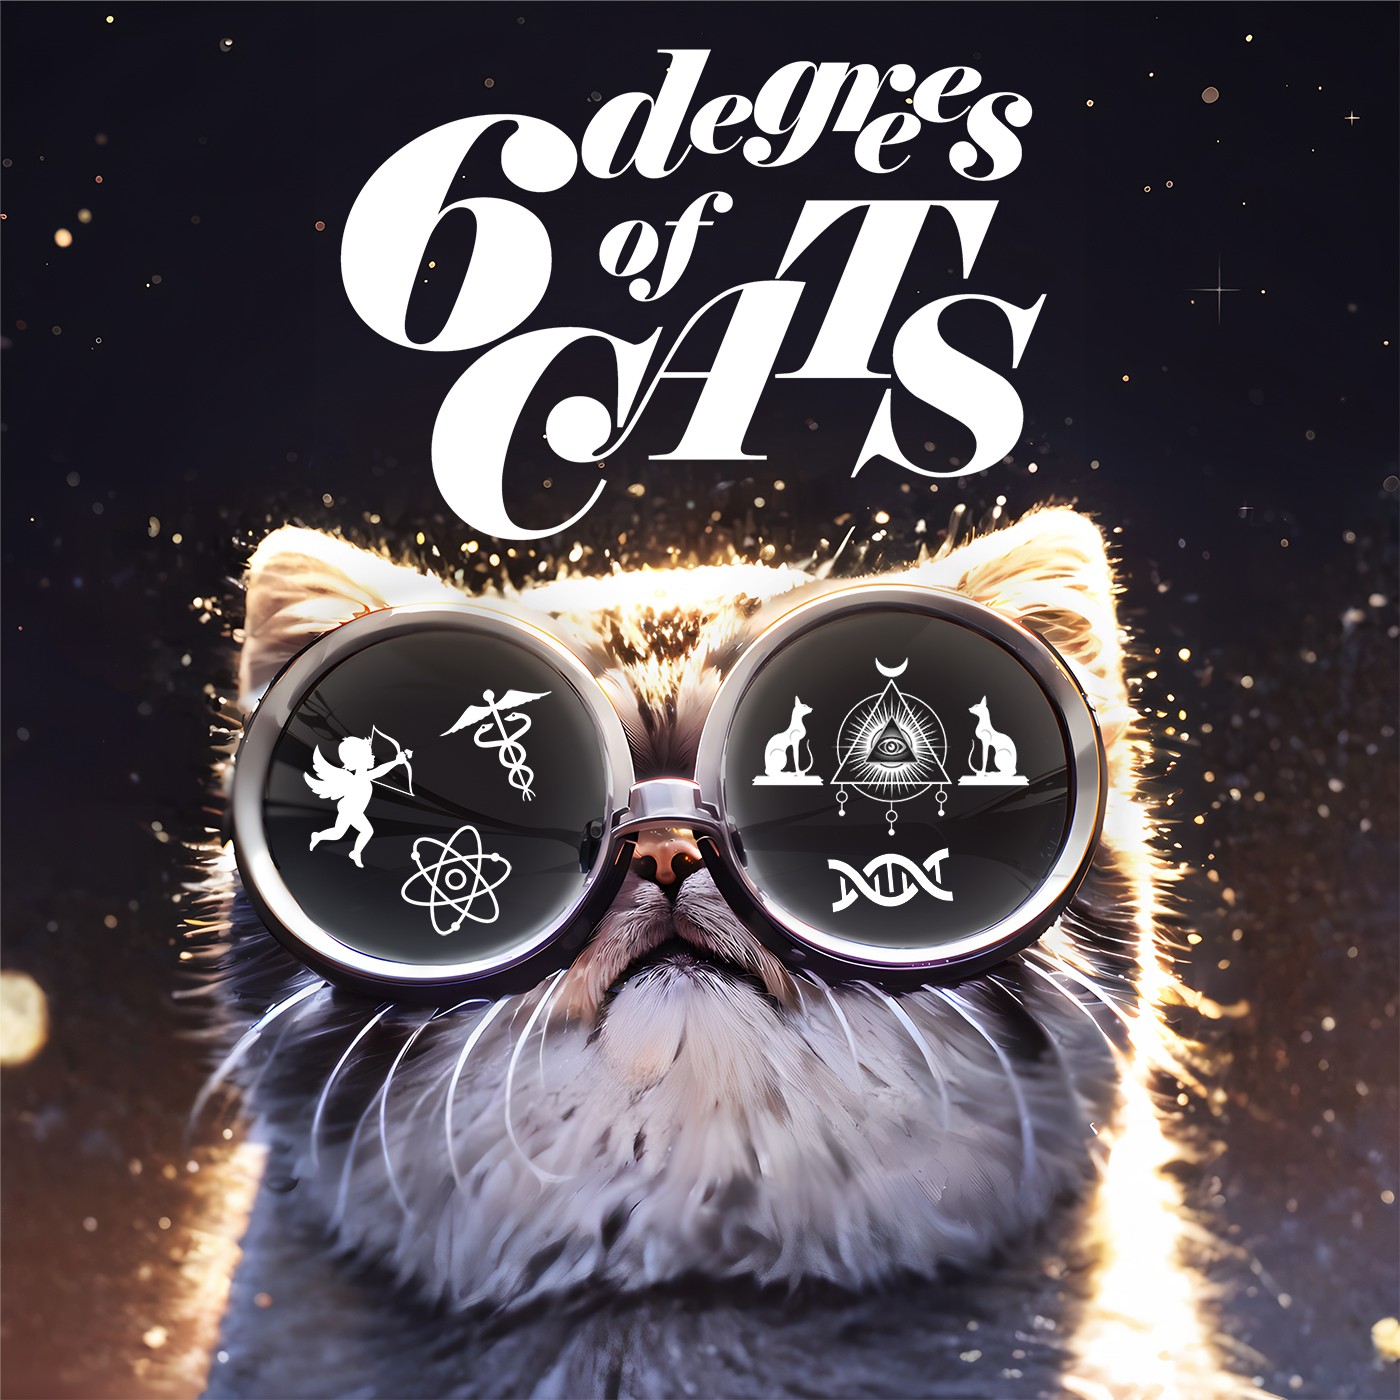 6 Degrees of Cats podcast show image